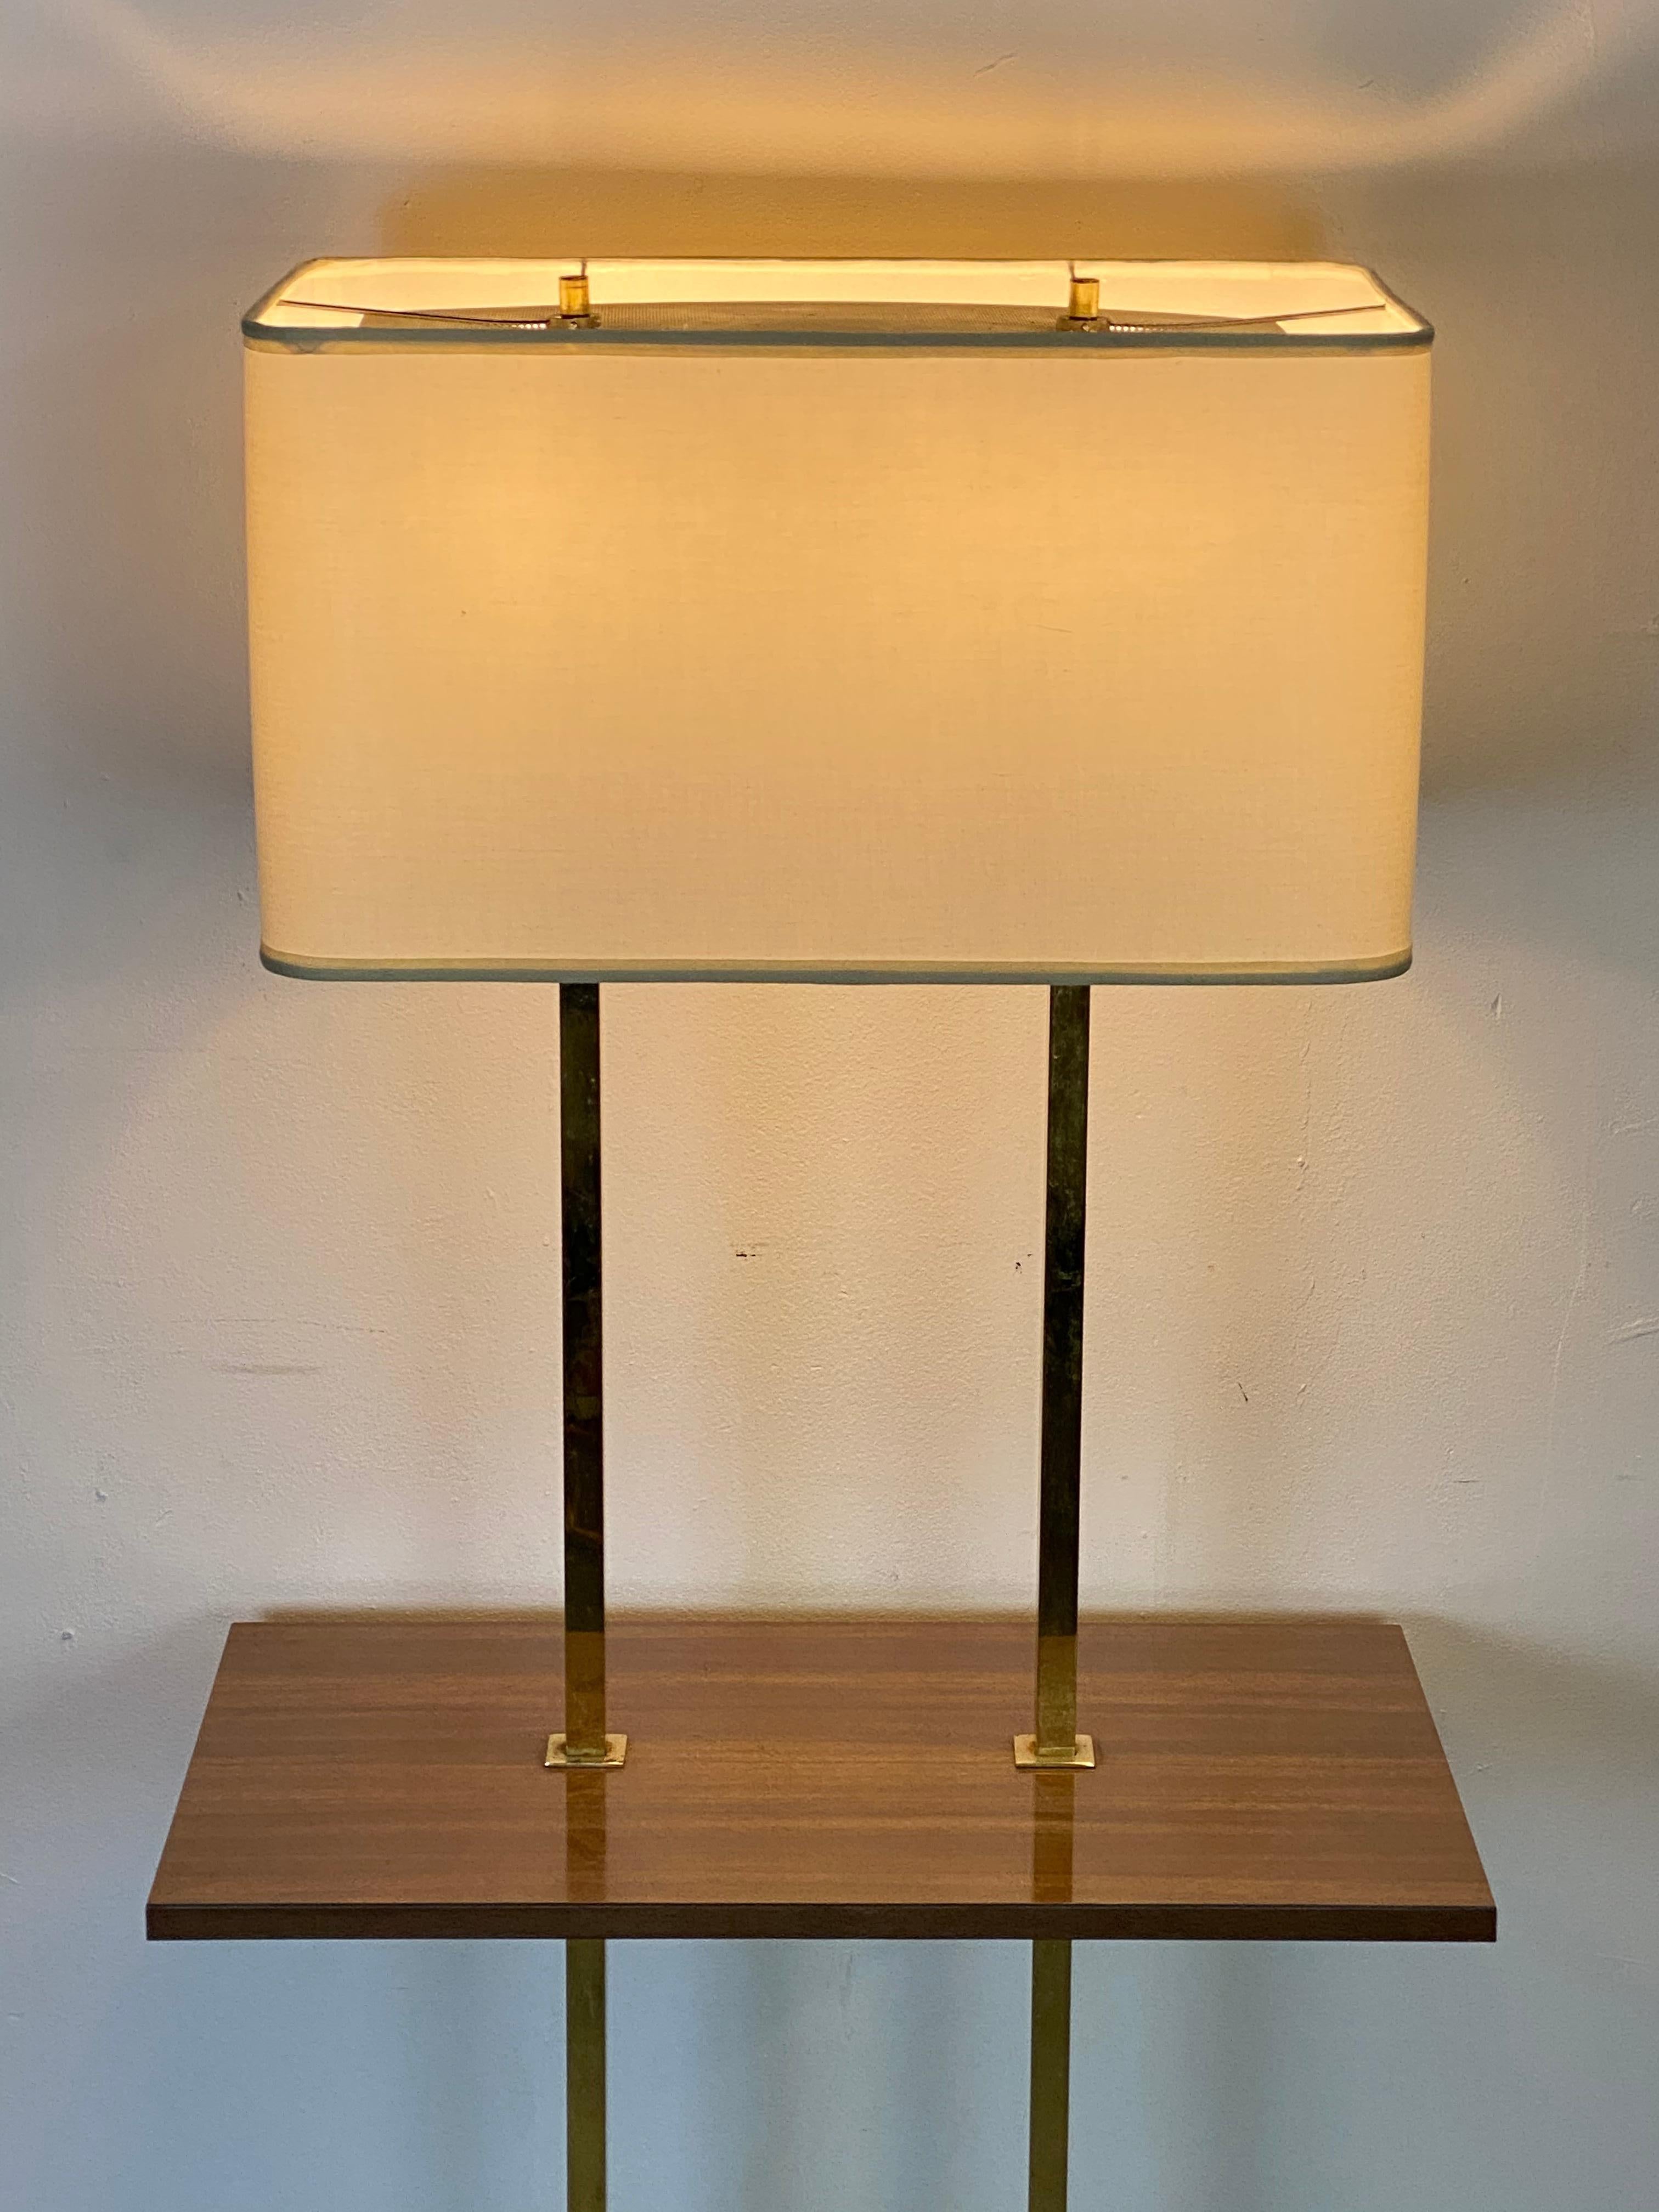 Elegant brass floor lamp in the manner of Stiffel. Rectangular tray provides the perfect place for your martini. New custom lampshade with original finials and perforated sheet atop. Double sockets allow for independent use and accommodate modern